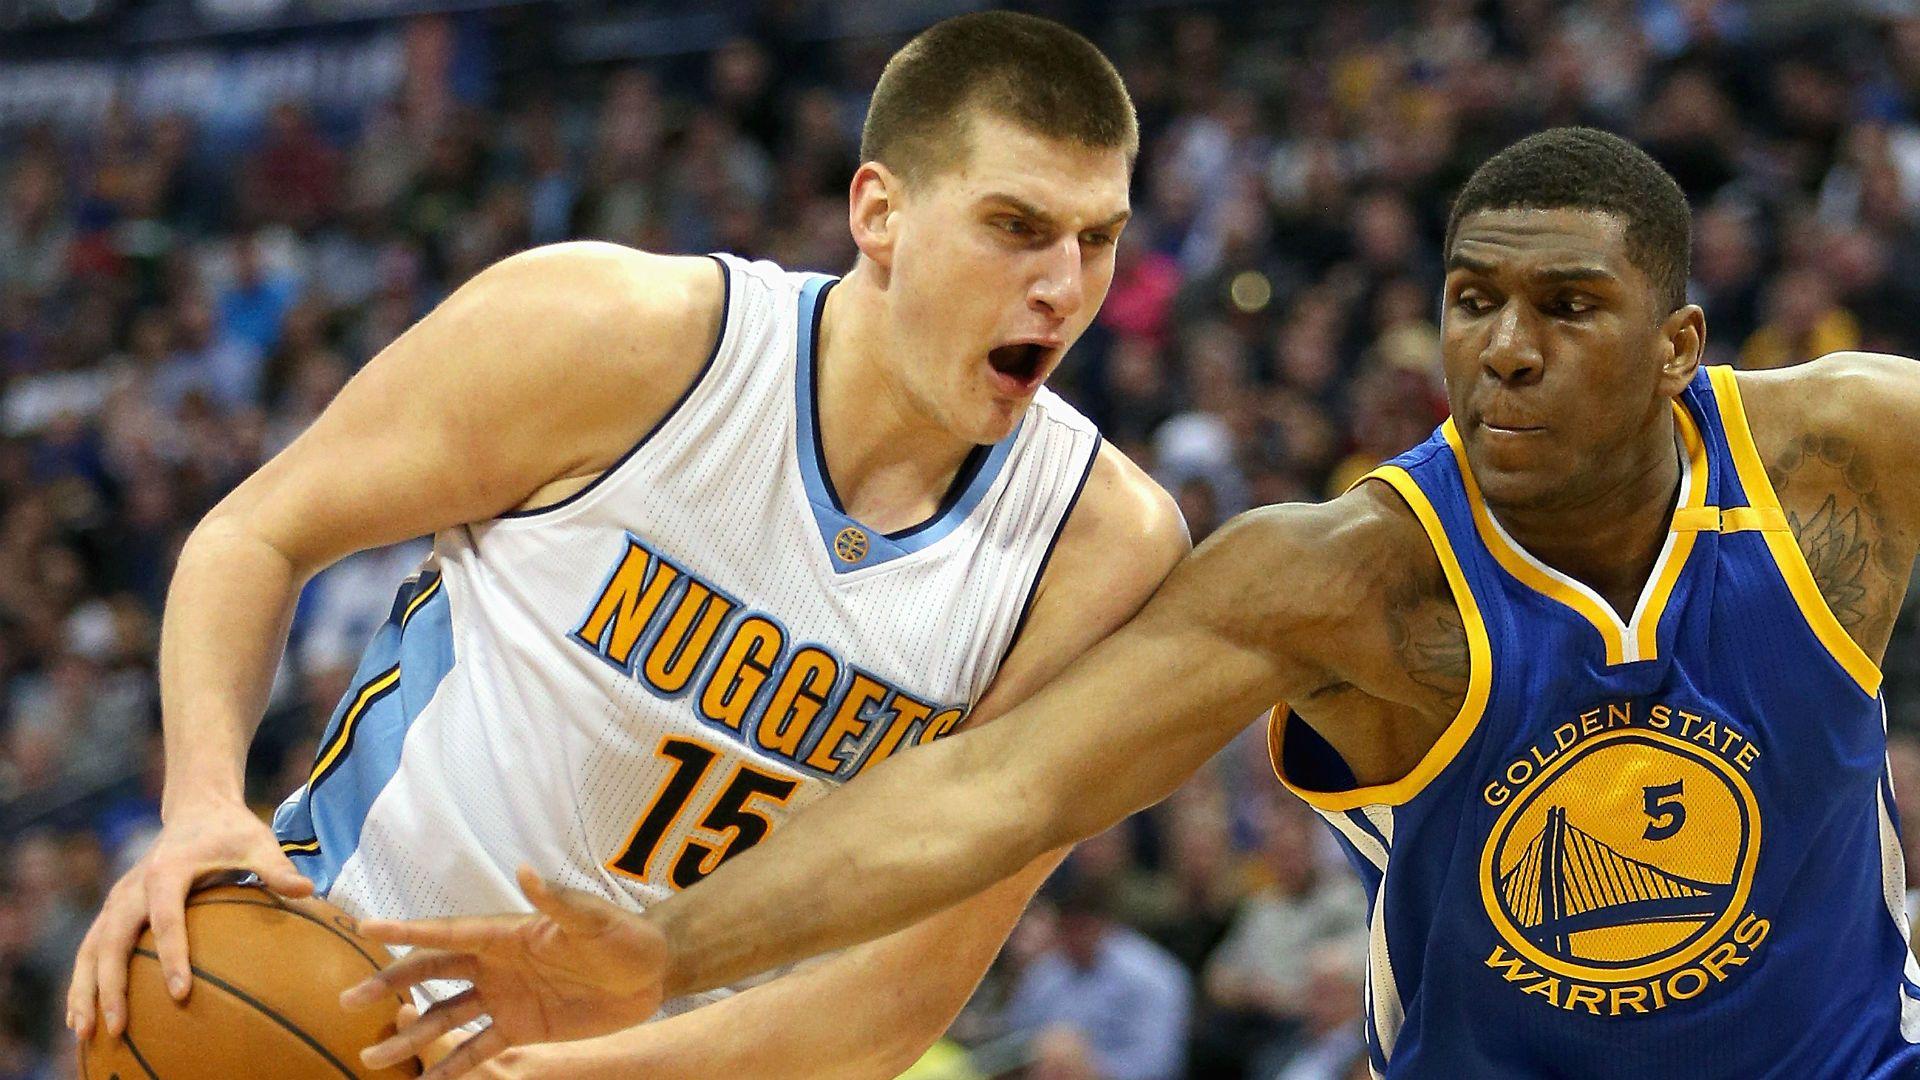 Nikola Jokic continues hot play as Nuggets knock off Pacers. NBA